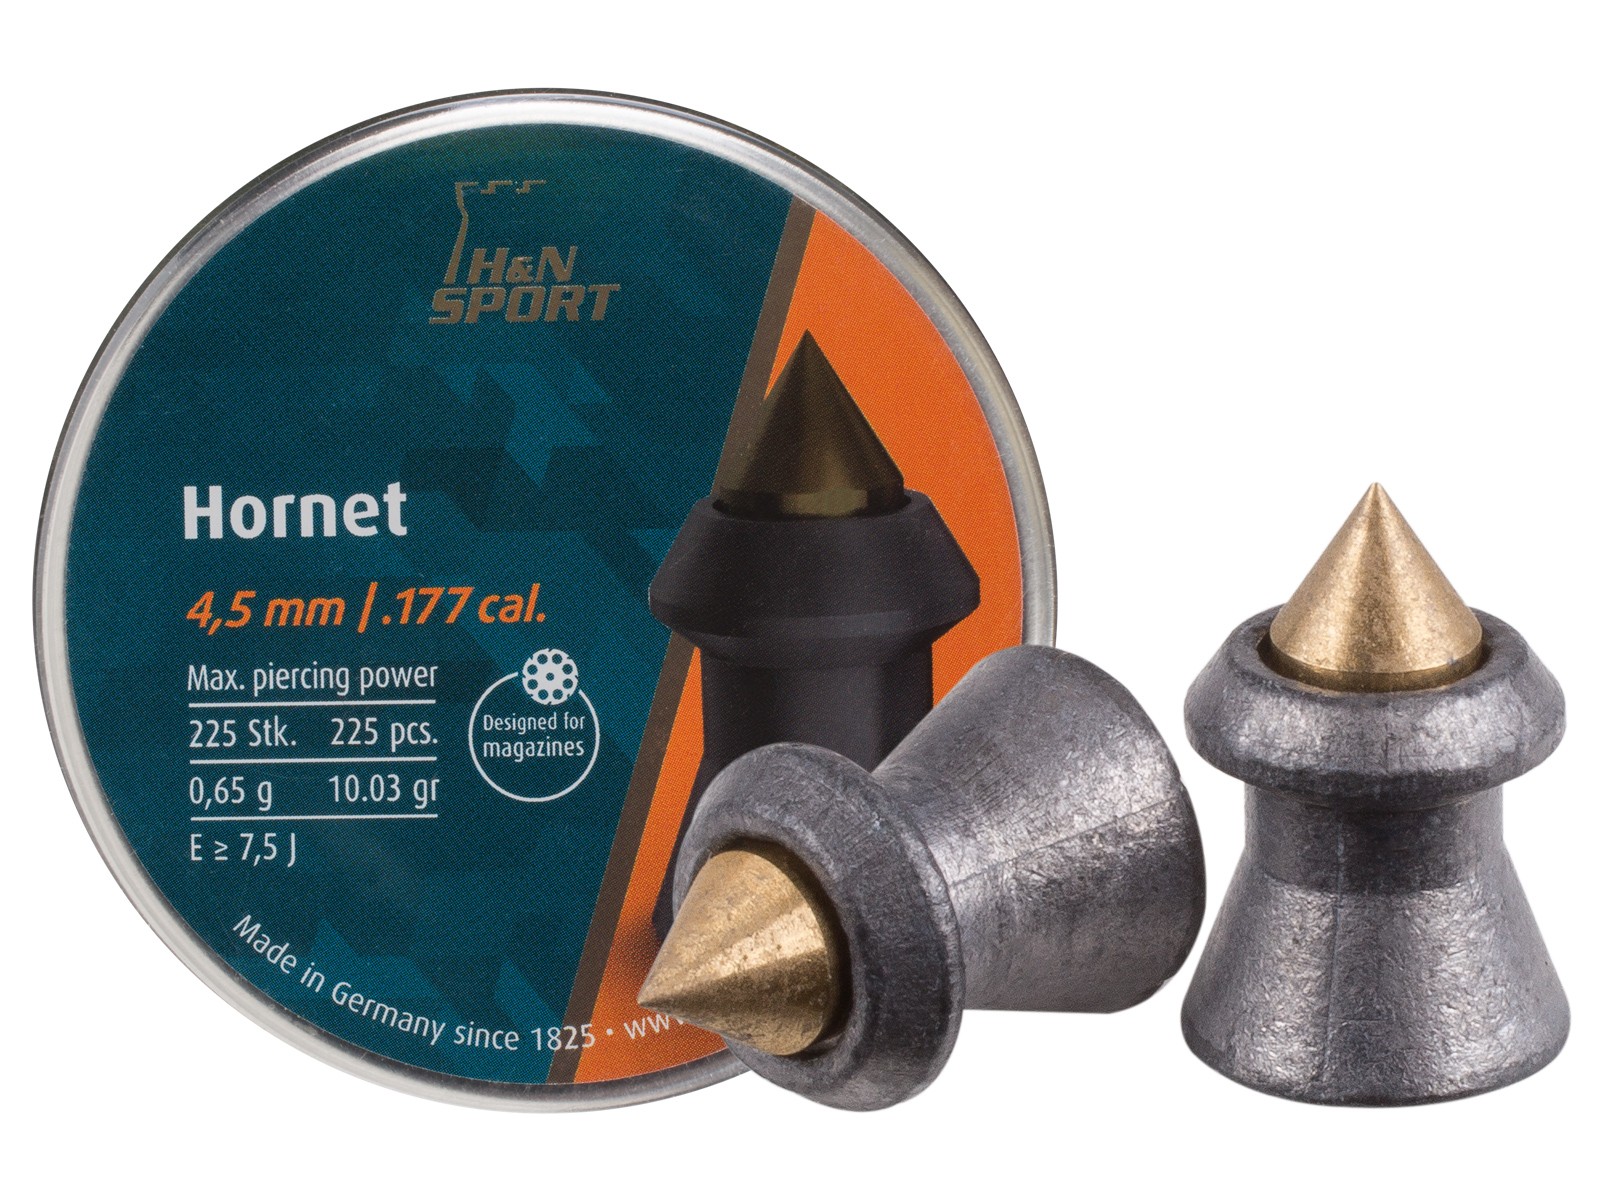 H&N Pointed Spitzkugel Light and Accurate Target Shooting .177 & .22 Pellets 